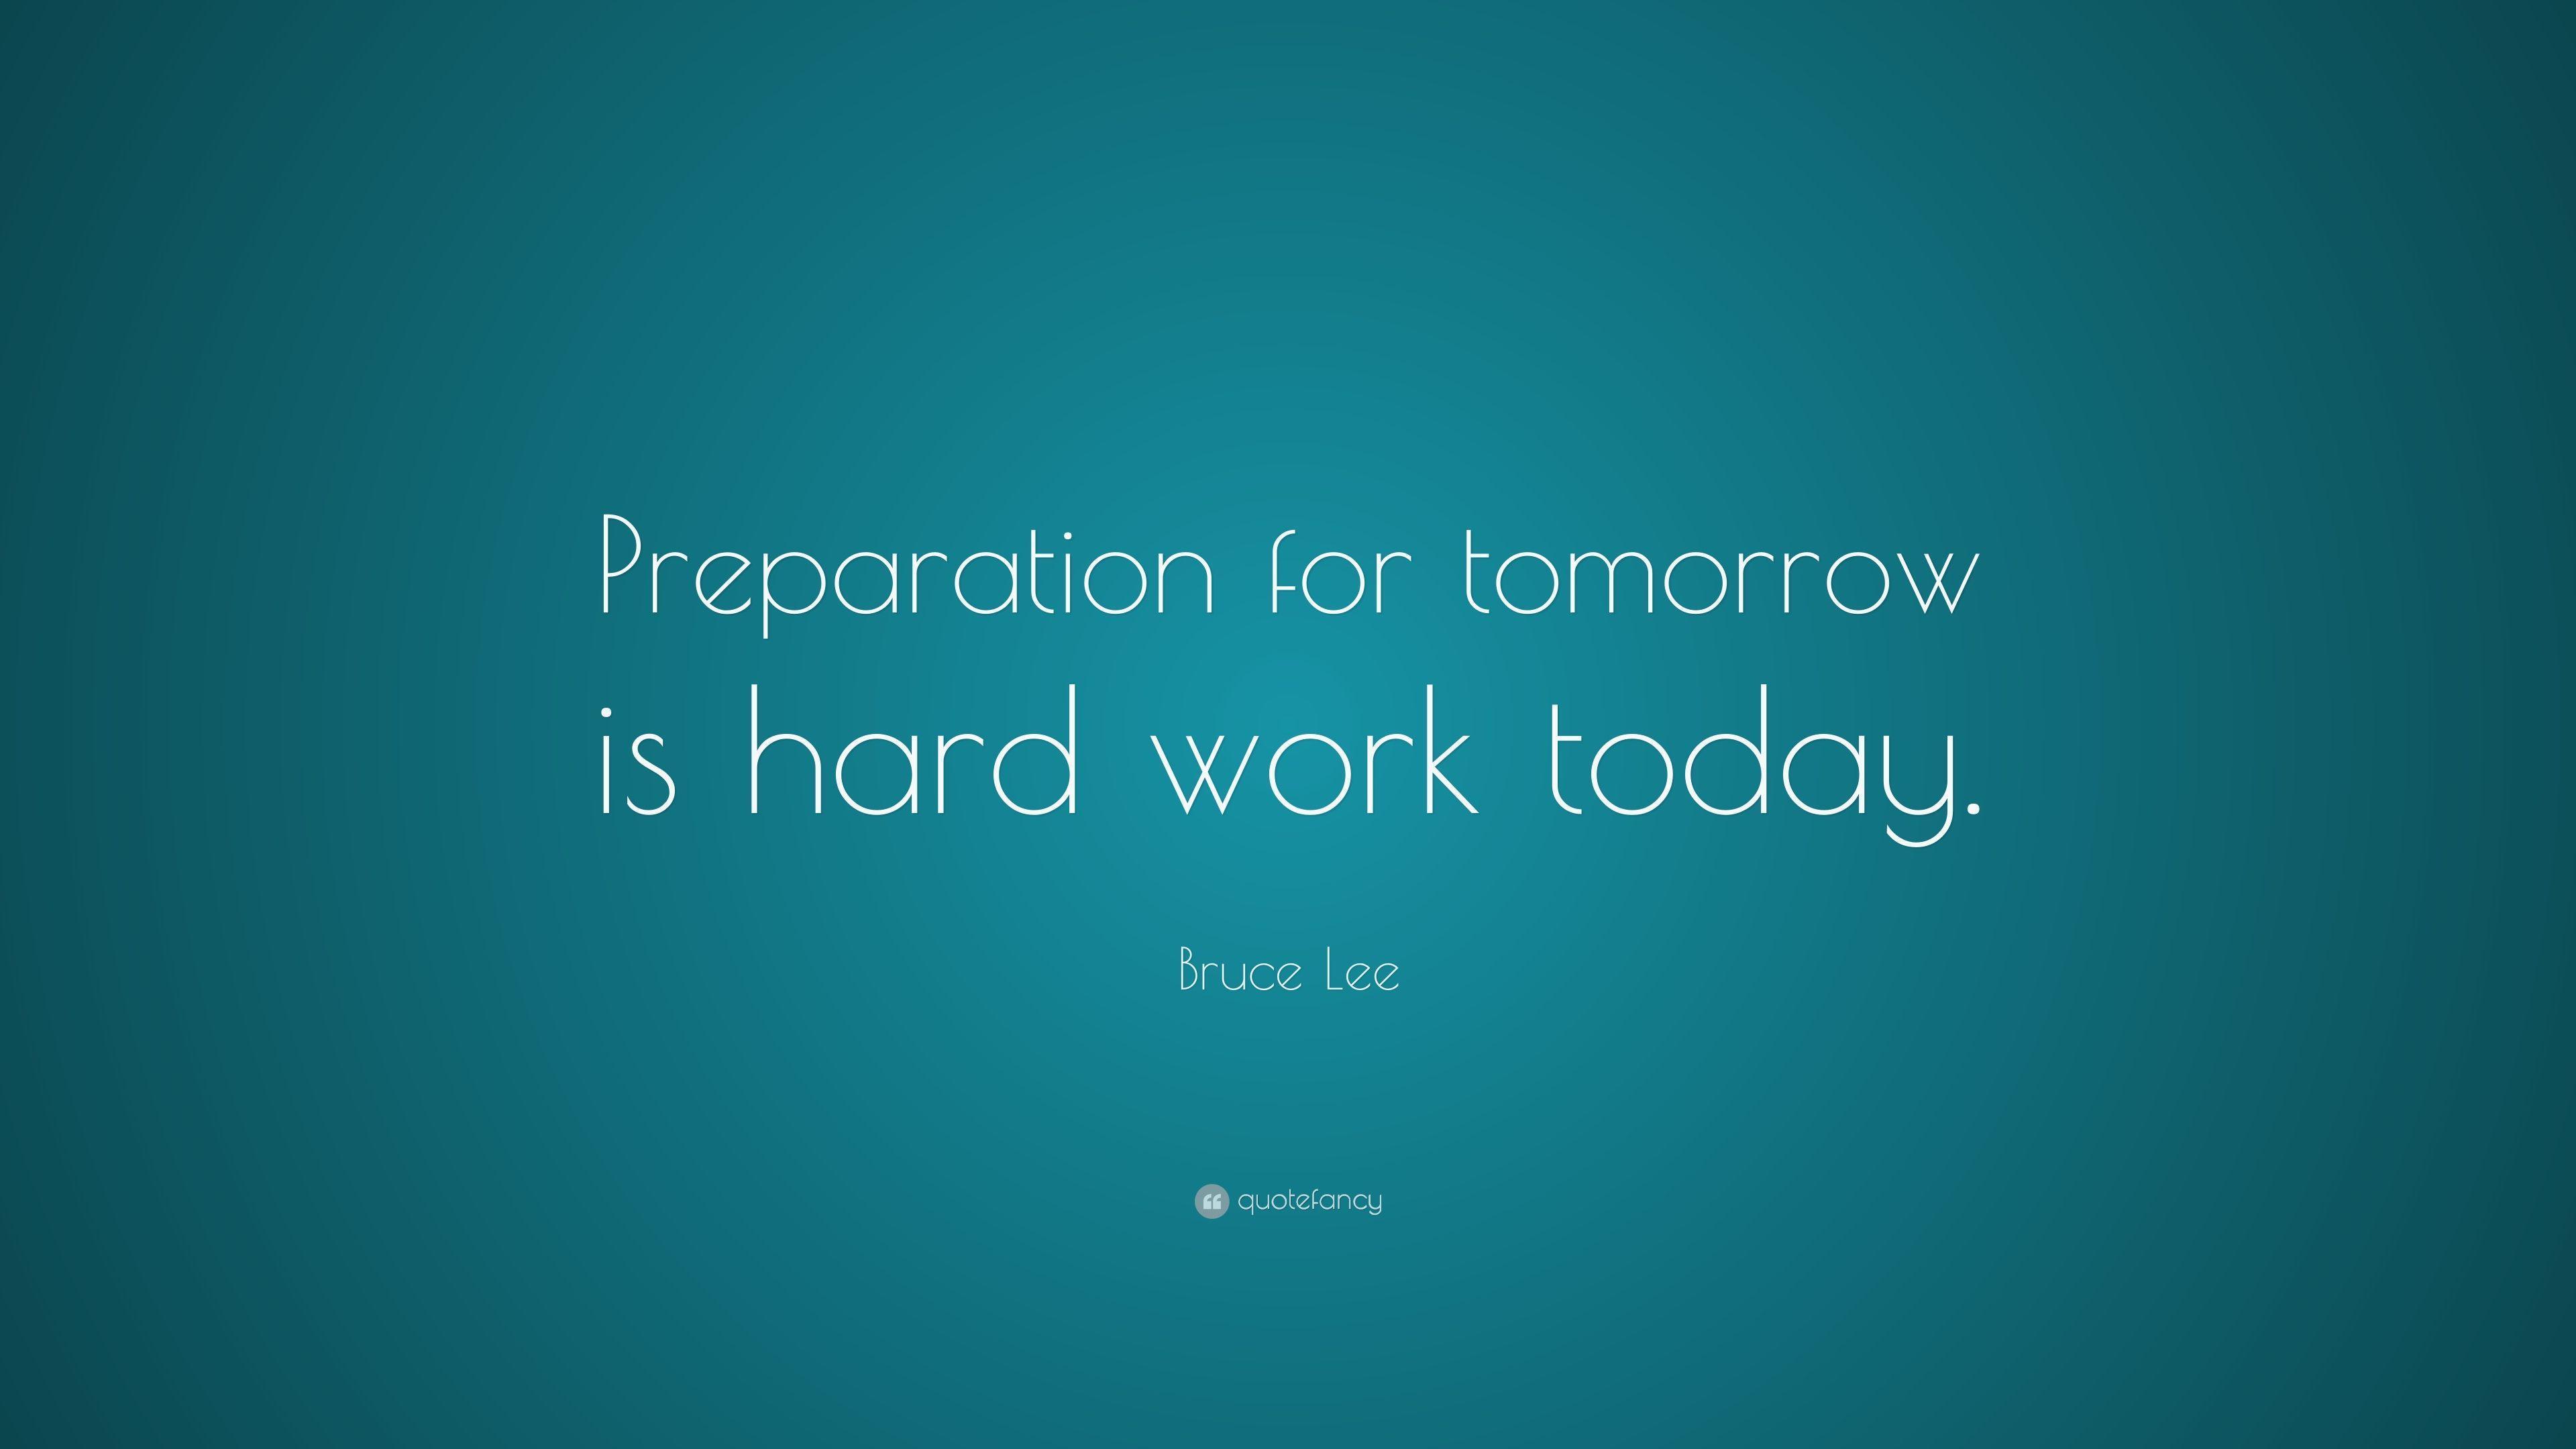 Bruce Lee Quote: “Preparation for tomorrow is hard work today